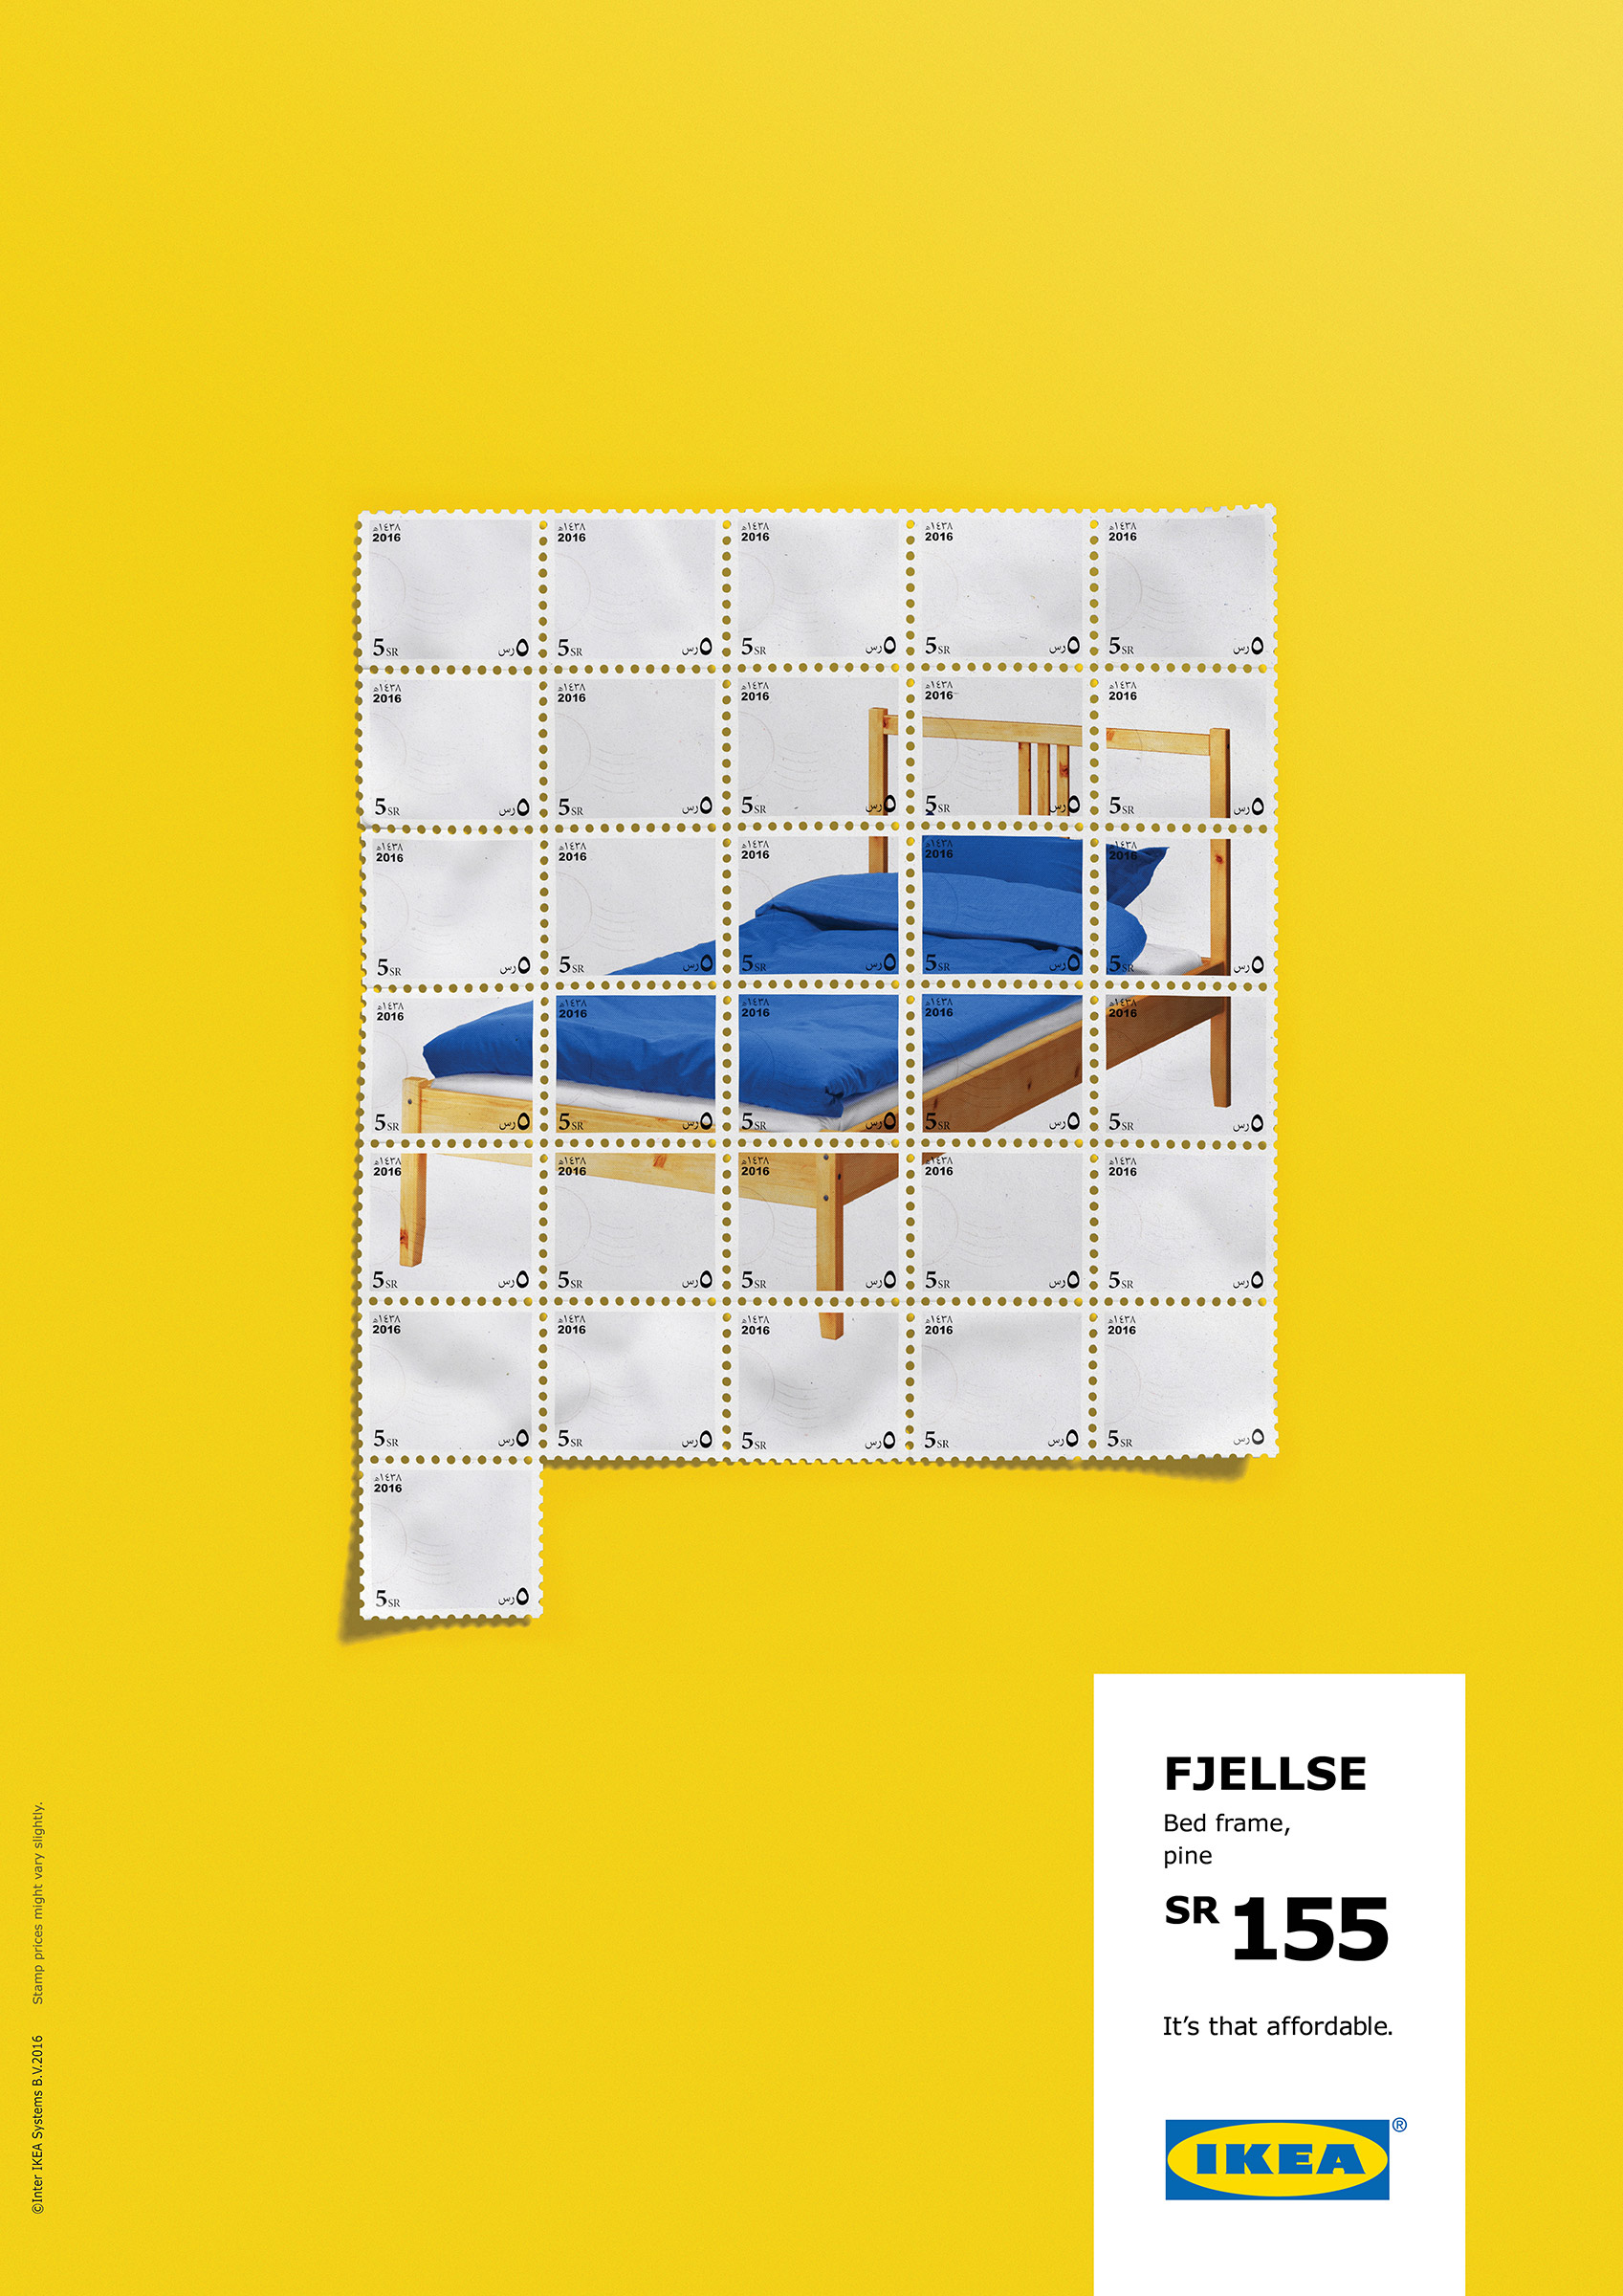 IKEA. It's that affordable.